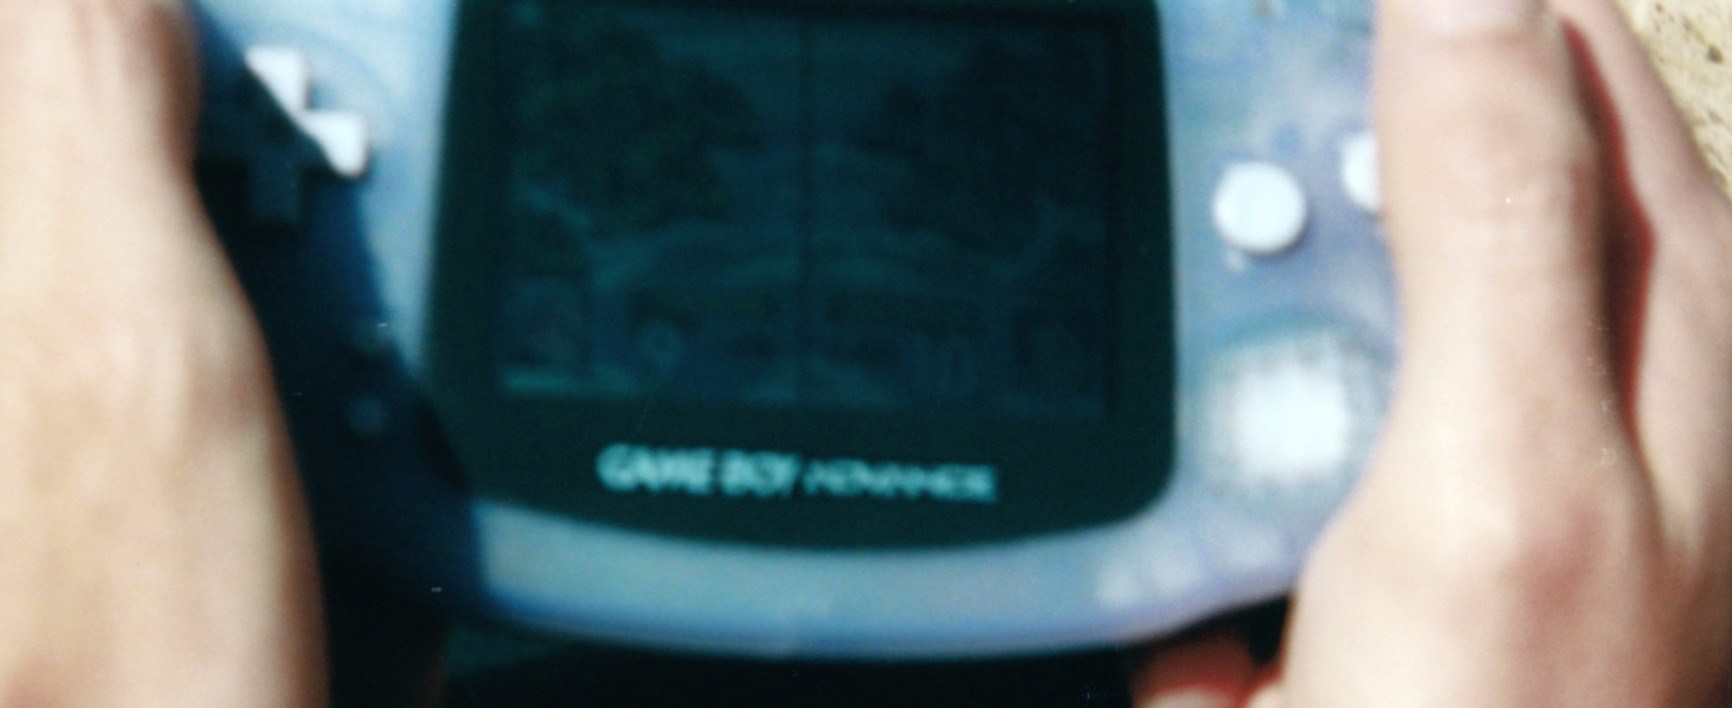 A blurry picture of a Nintendo GBA with Advance Wars barely visible playing on its screen